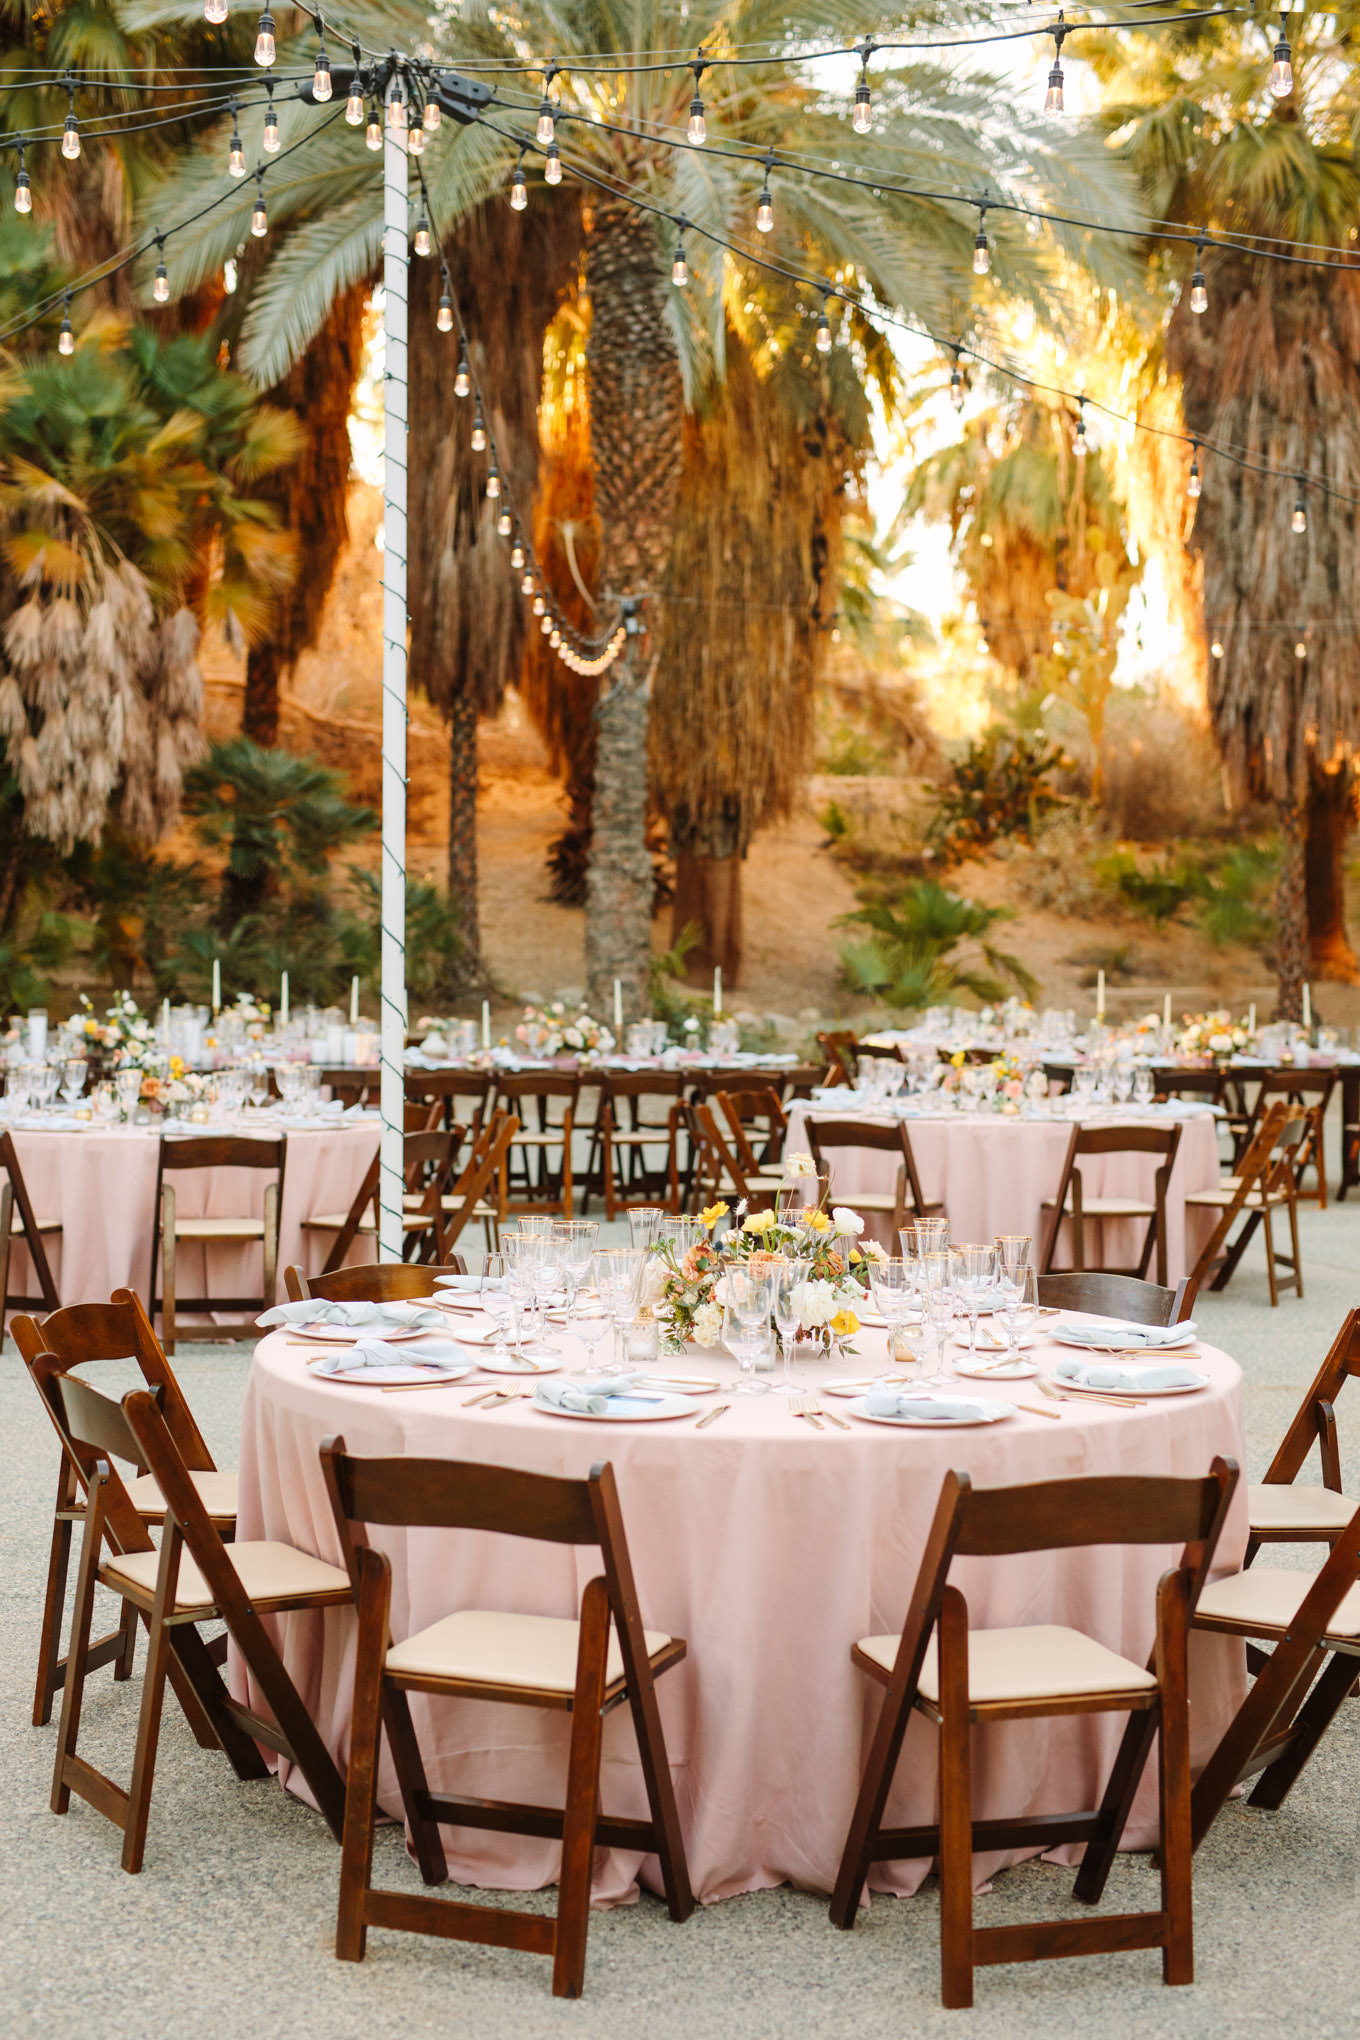 Blush wedding reception in palm garden | Living Desert Zoo & Gardens wedding with unique details | Elevated and colorful wedding photography for fun-loving couples in Southern California |  #PalmSprings #palmspringsphotographer #gardenwedding #palmspringswedding  Source: Mary Costa Photography | Los Angeles wedding photographer 